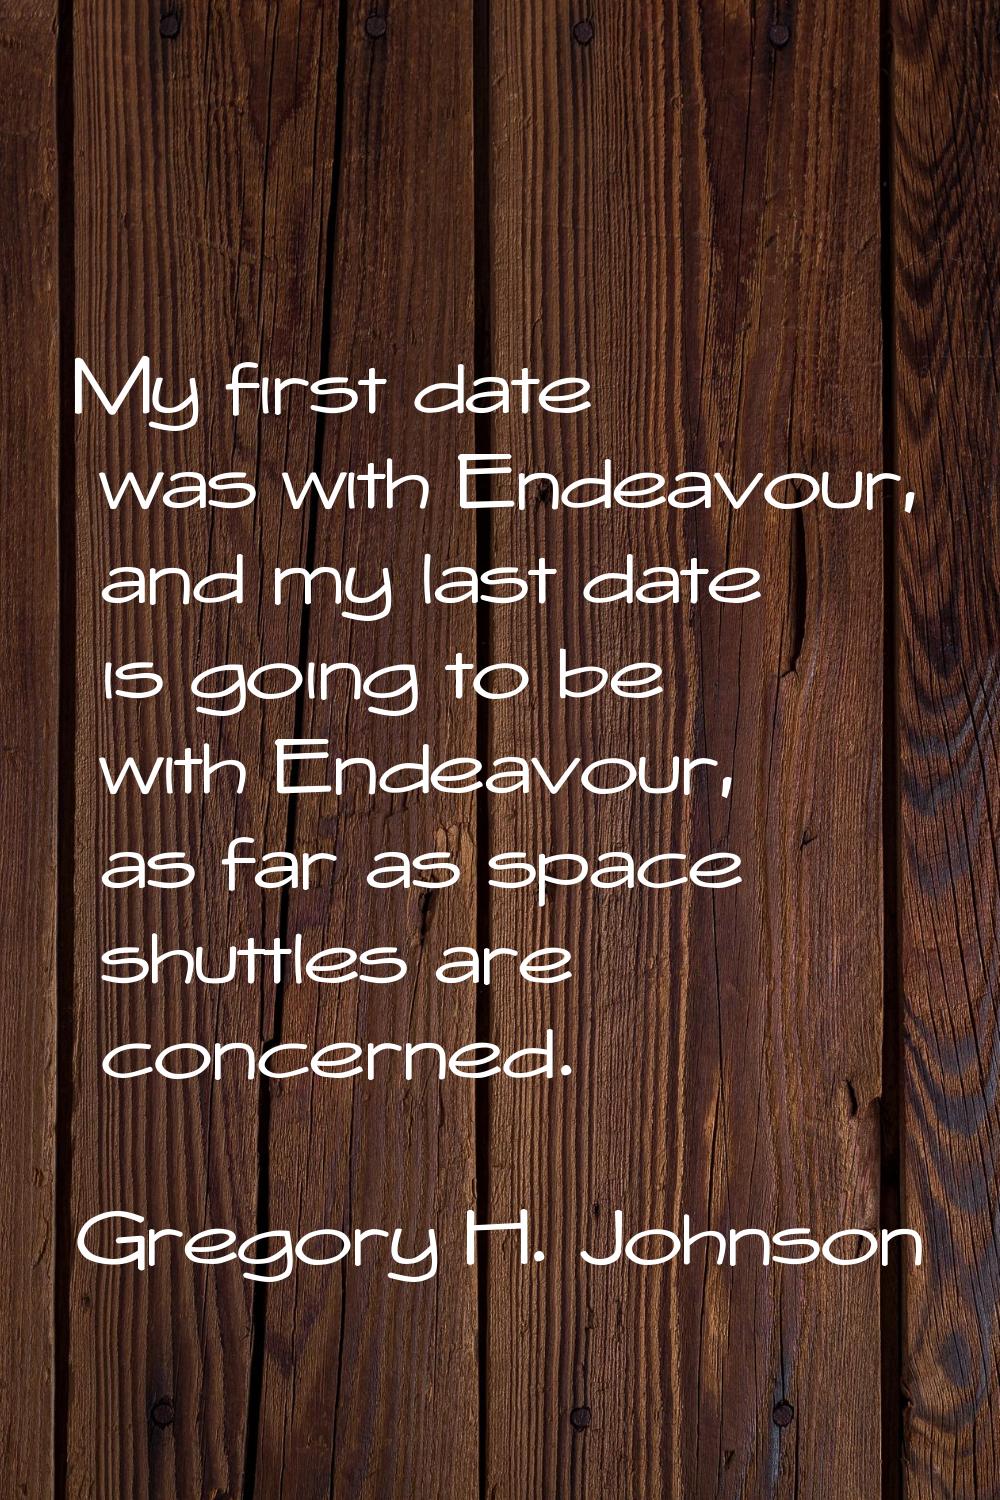 My first date was with Endeavour, and my last date is going to be with Endeavour, as far as space s